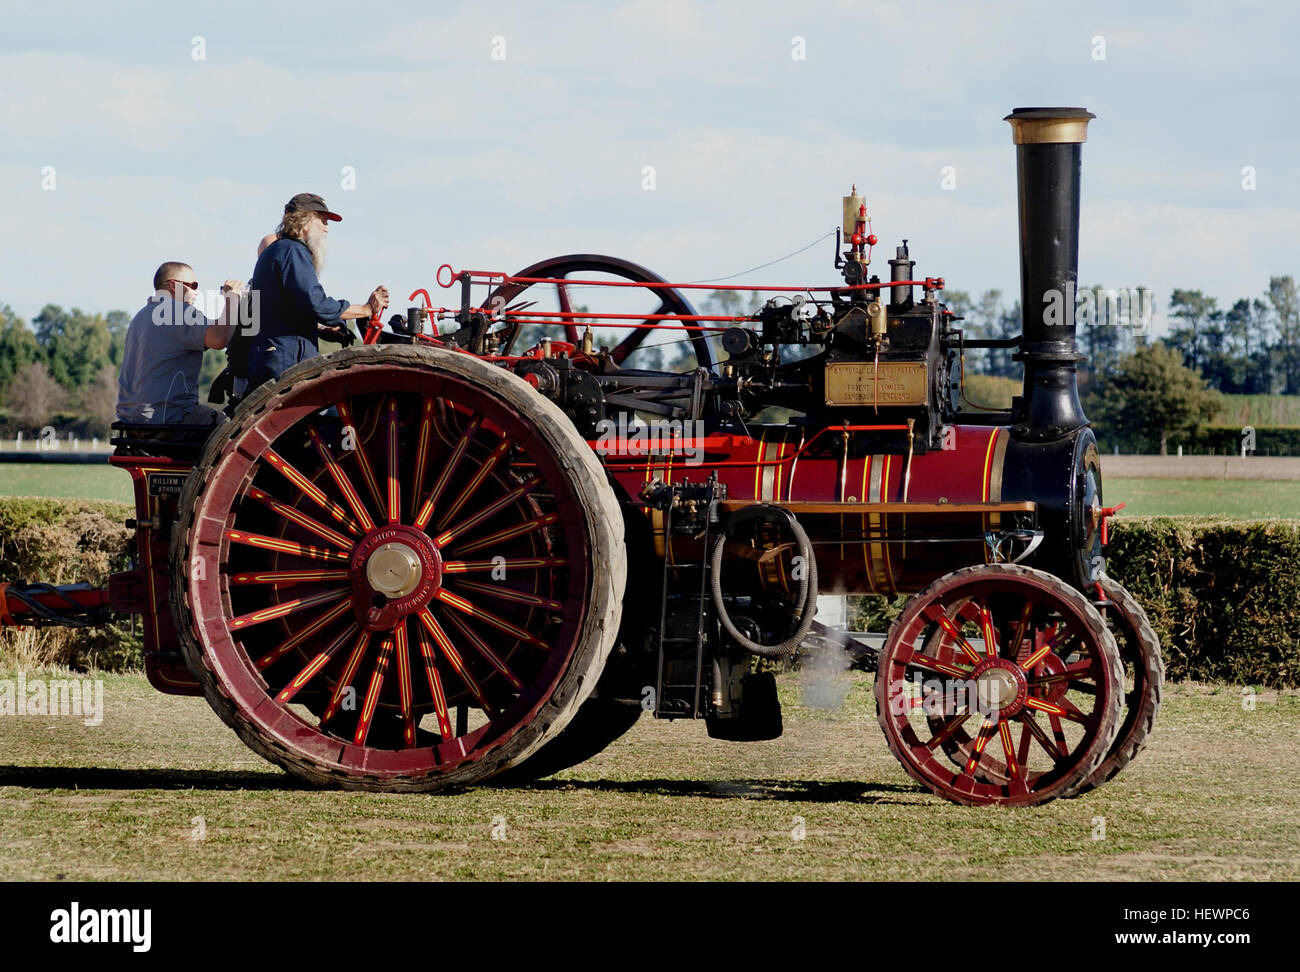 A traction engine is a self-propelled steam engine used to move heavy loads on roads, plough ground or to provide power at a chosen location. The name derives from the Latin tractus, meaning 'drawn', since the prime function of any traction engine is to draw a load behind it. They are sometimes called road locomotives to distinguish them from railway locomotives – that is, steam engines that run on rails.  Traction engines tend to be large, robust and powerful, but heavy, slow, and difficult to manoeuvre. Nevertheless, they revolutionized agriculture and road haulage at a time when the only al Stock Photo